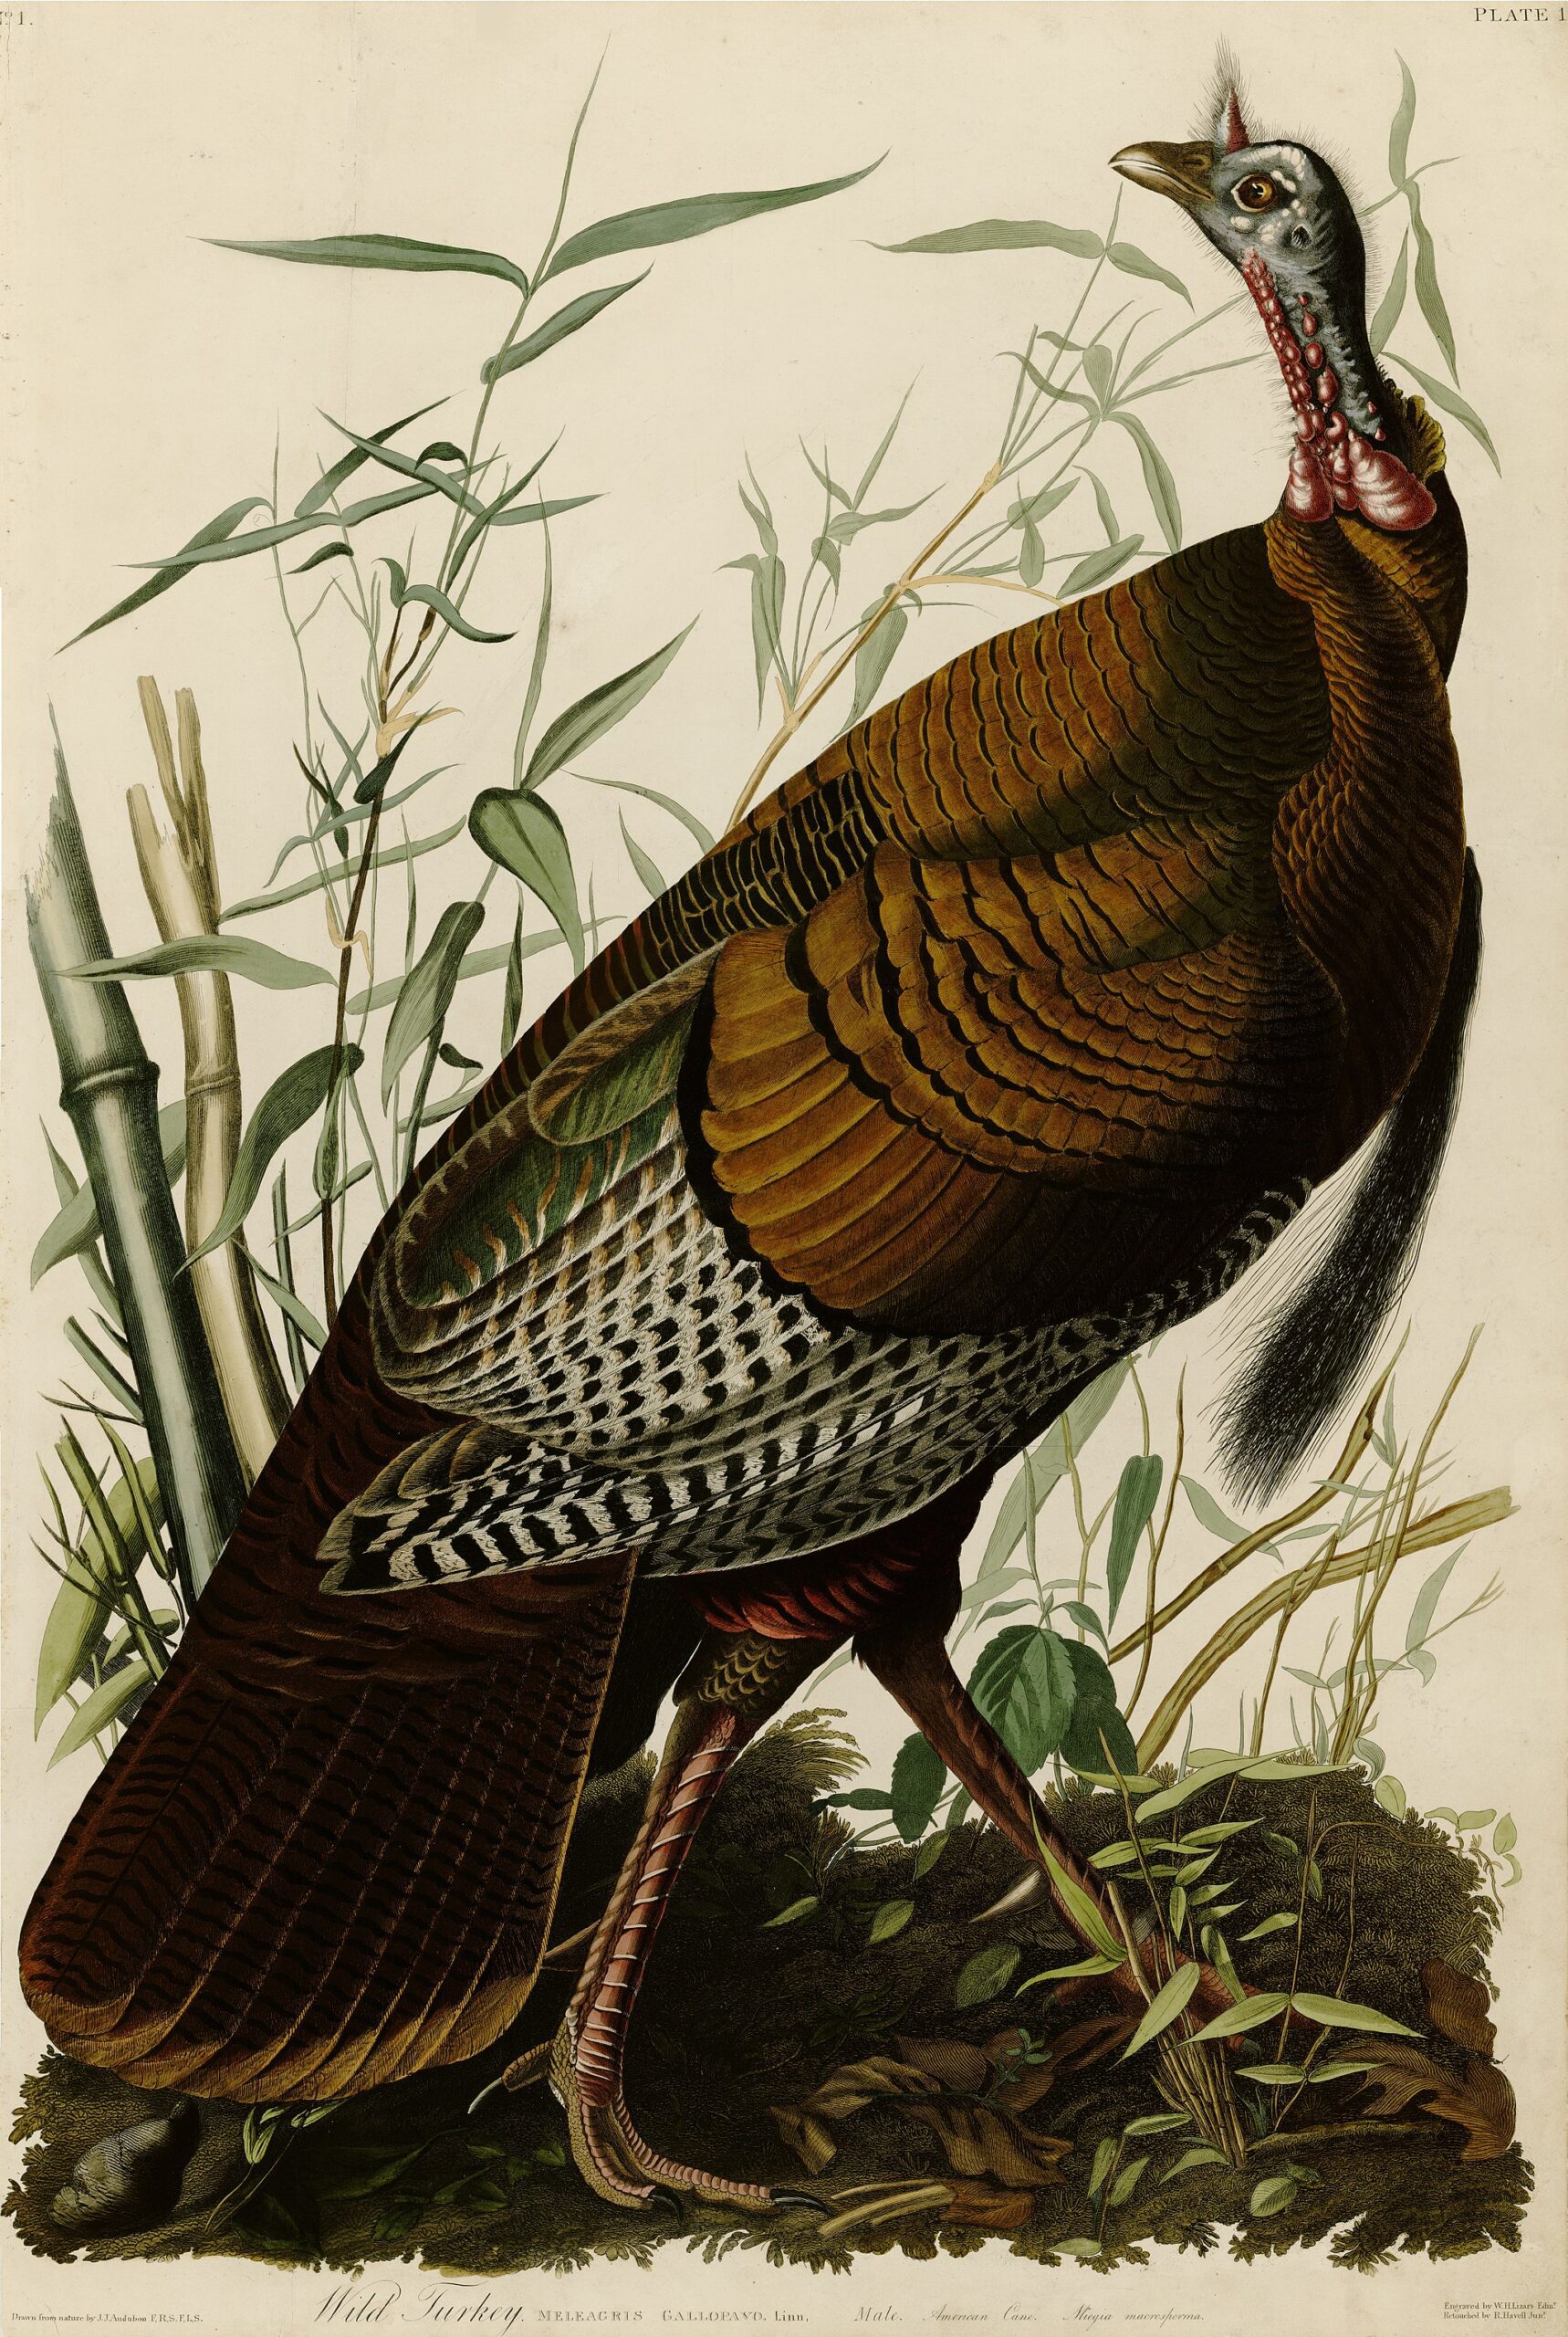 Illustration of a Wild Turkey by John James Audubon, made by hand coloring a copper plate engraving.